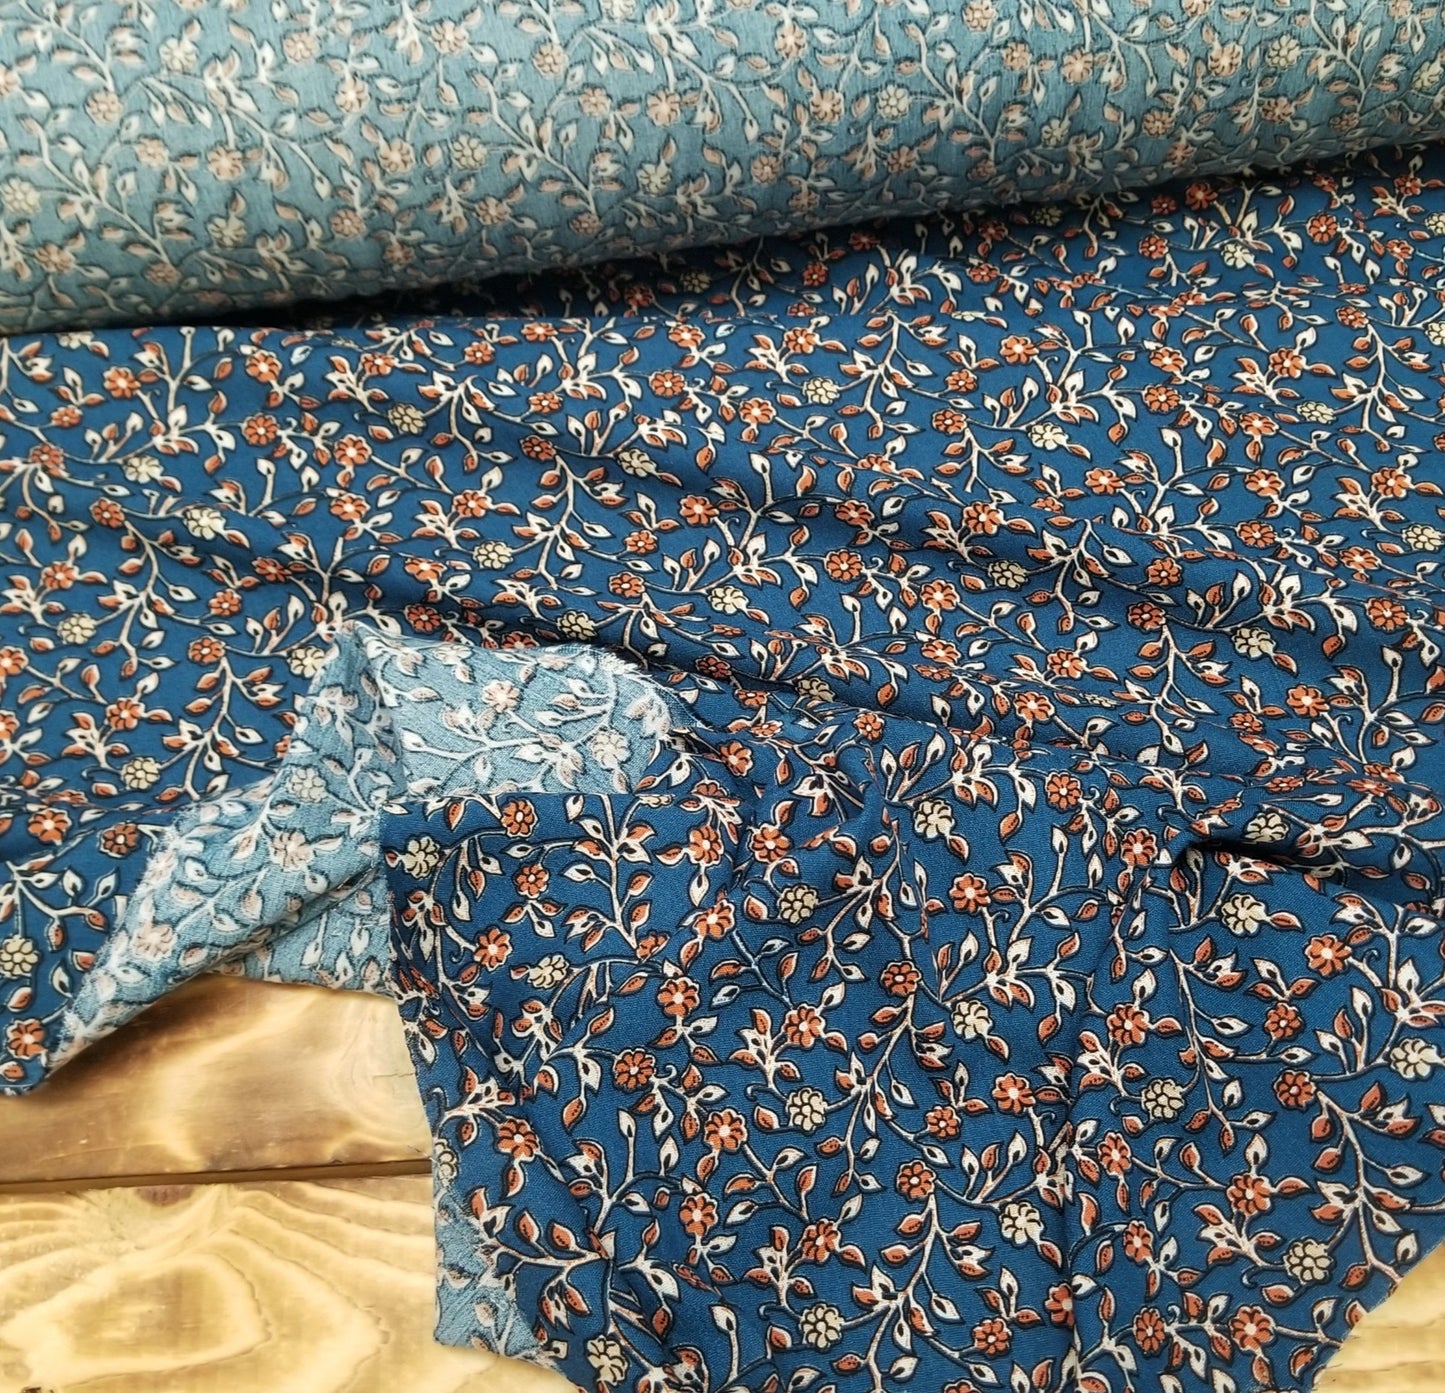 Designer Deadstock Rayon Crinkle Crepe Stretch Navy and Rust Boho Floral Woven- By the yard